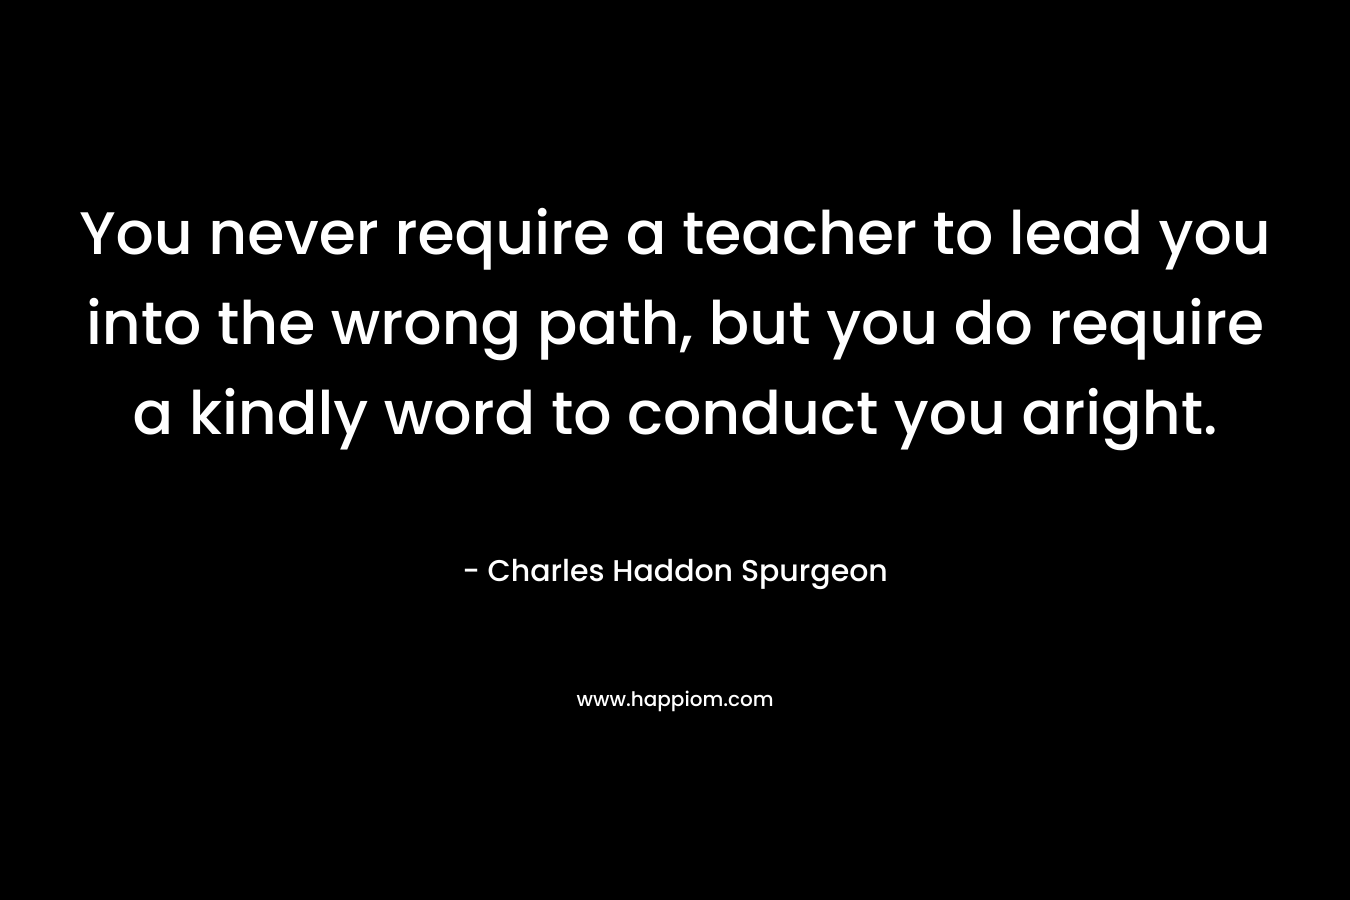 You never require a teacher to lead you into the wrong path, but you do require a kindly word to conduct you aright.